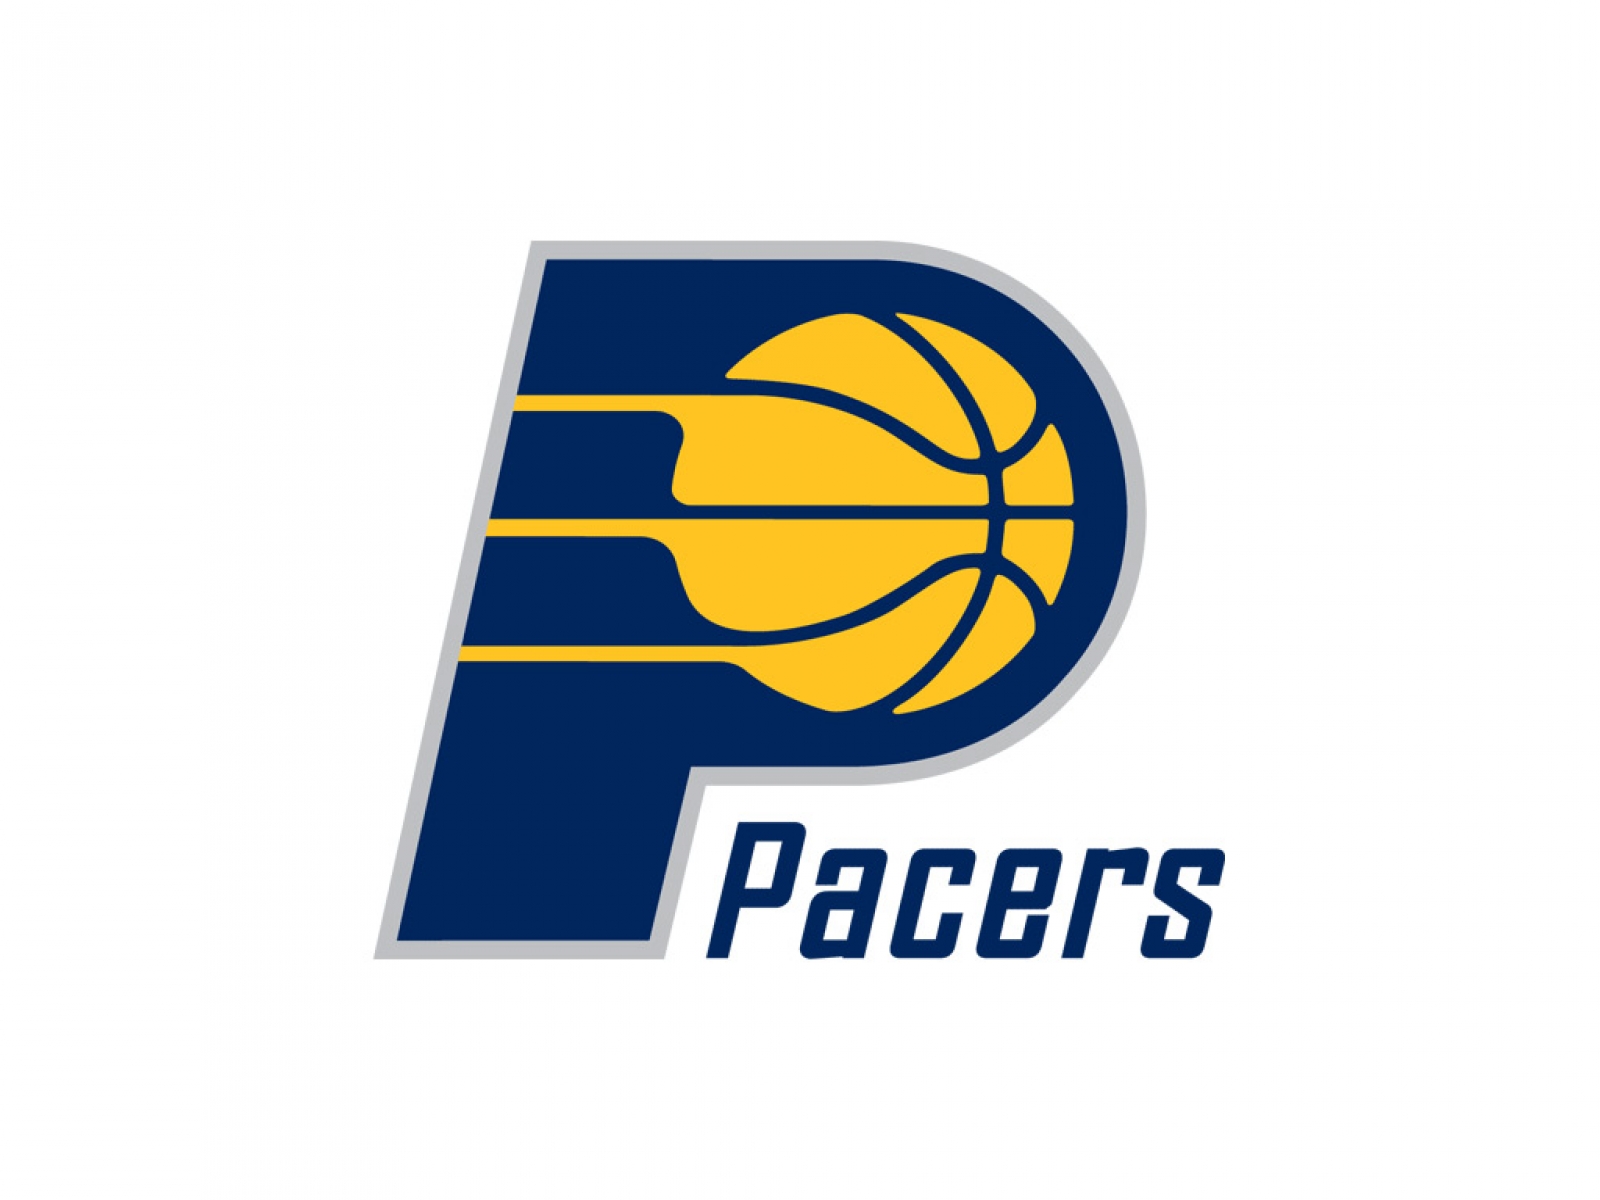 INDIANA PACERS nba basketball 2 wallpaper background